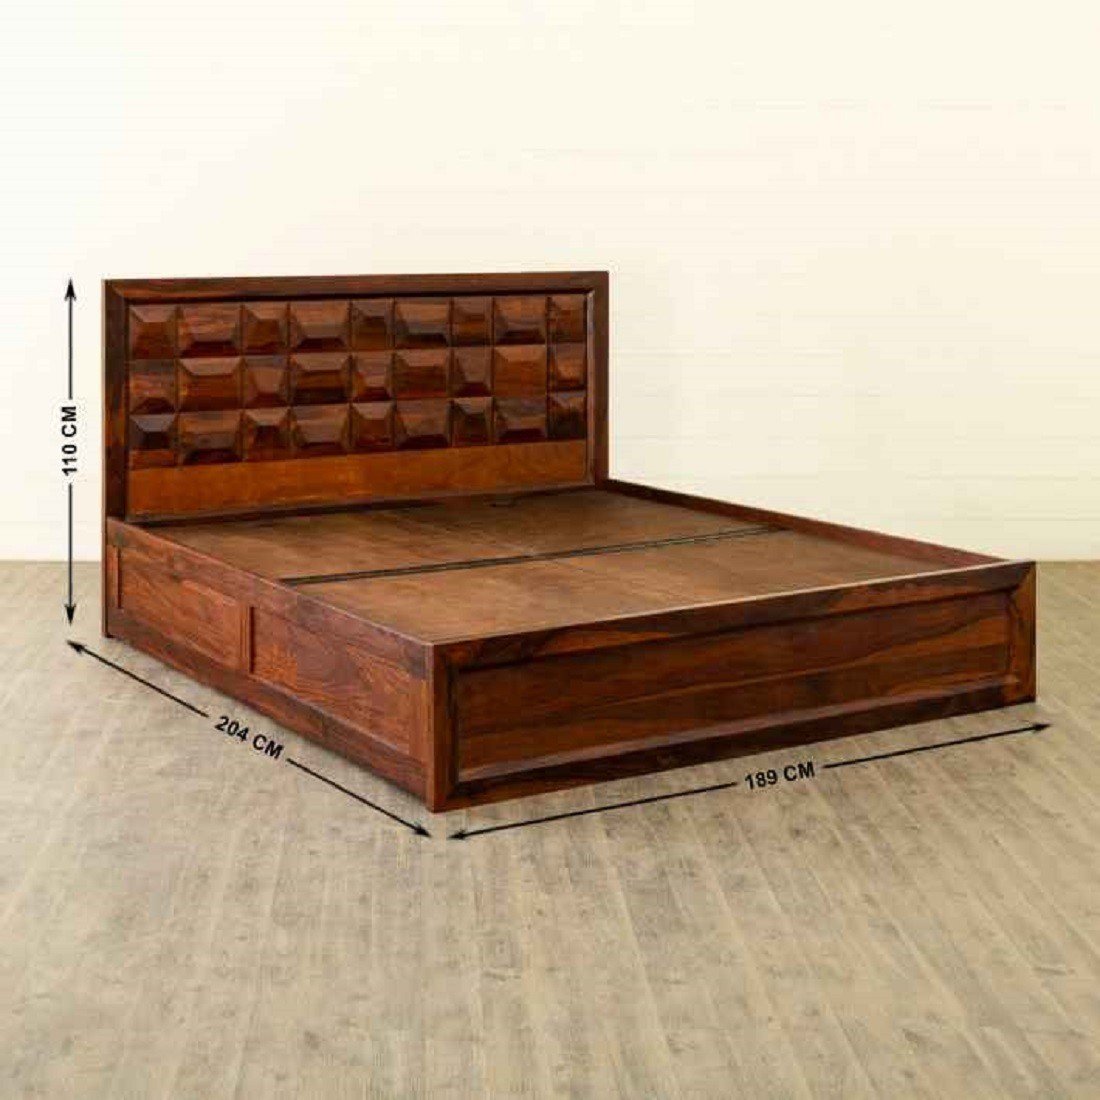 Aaram By Zebrs Solid Wood King Box Bed (Finish Color - HONEY FINISH, Delivery Condition - DIY(Do-It-Yourself))